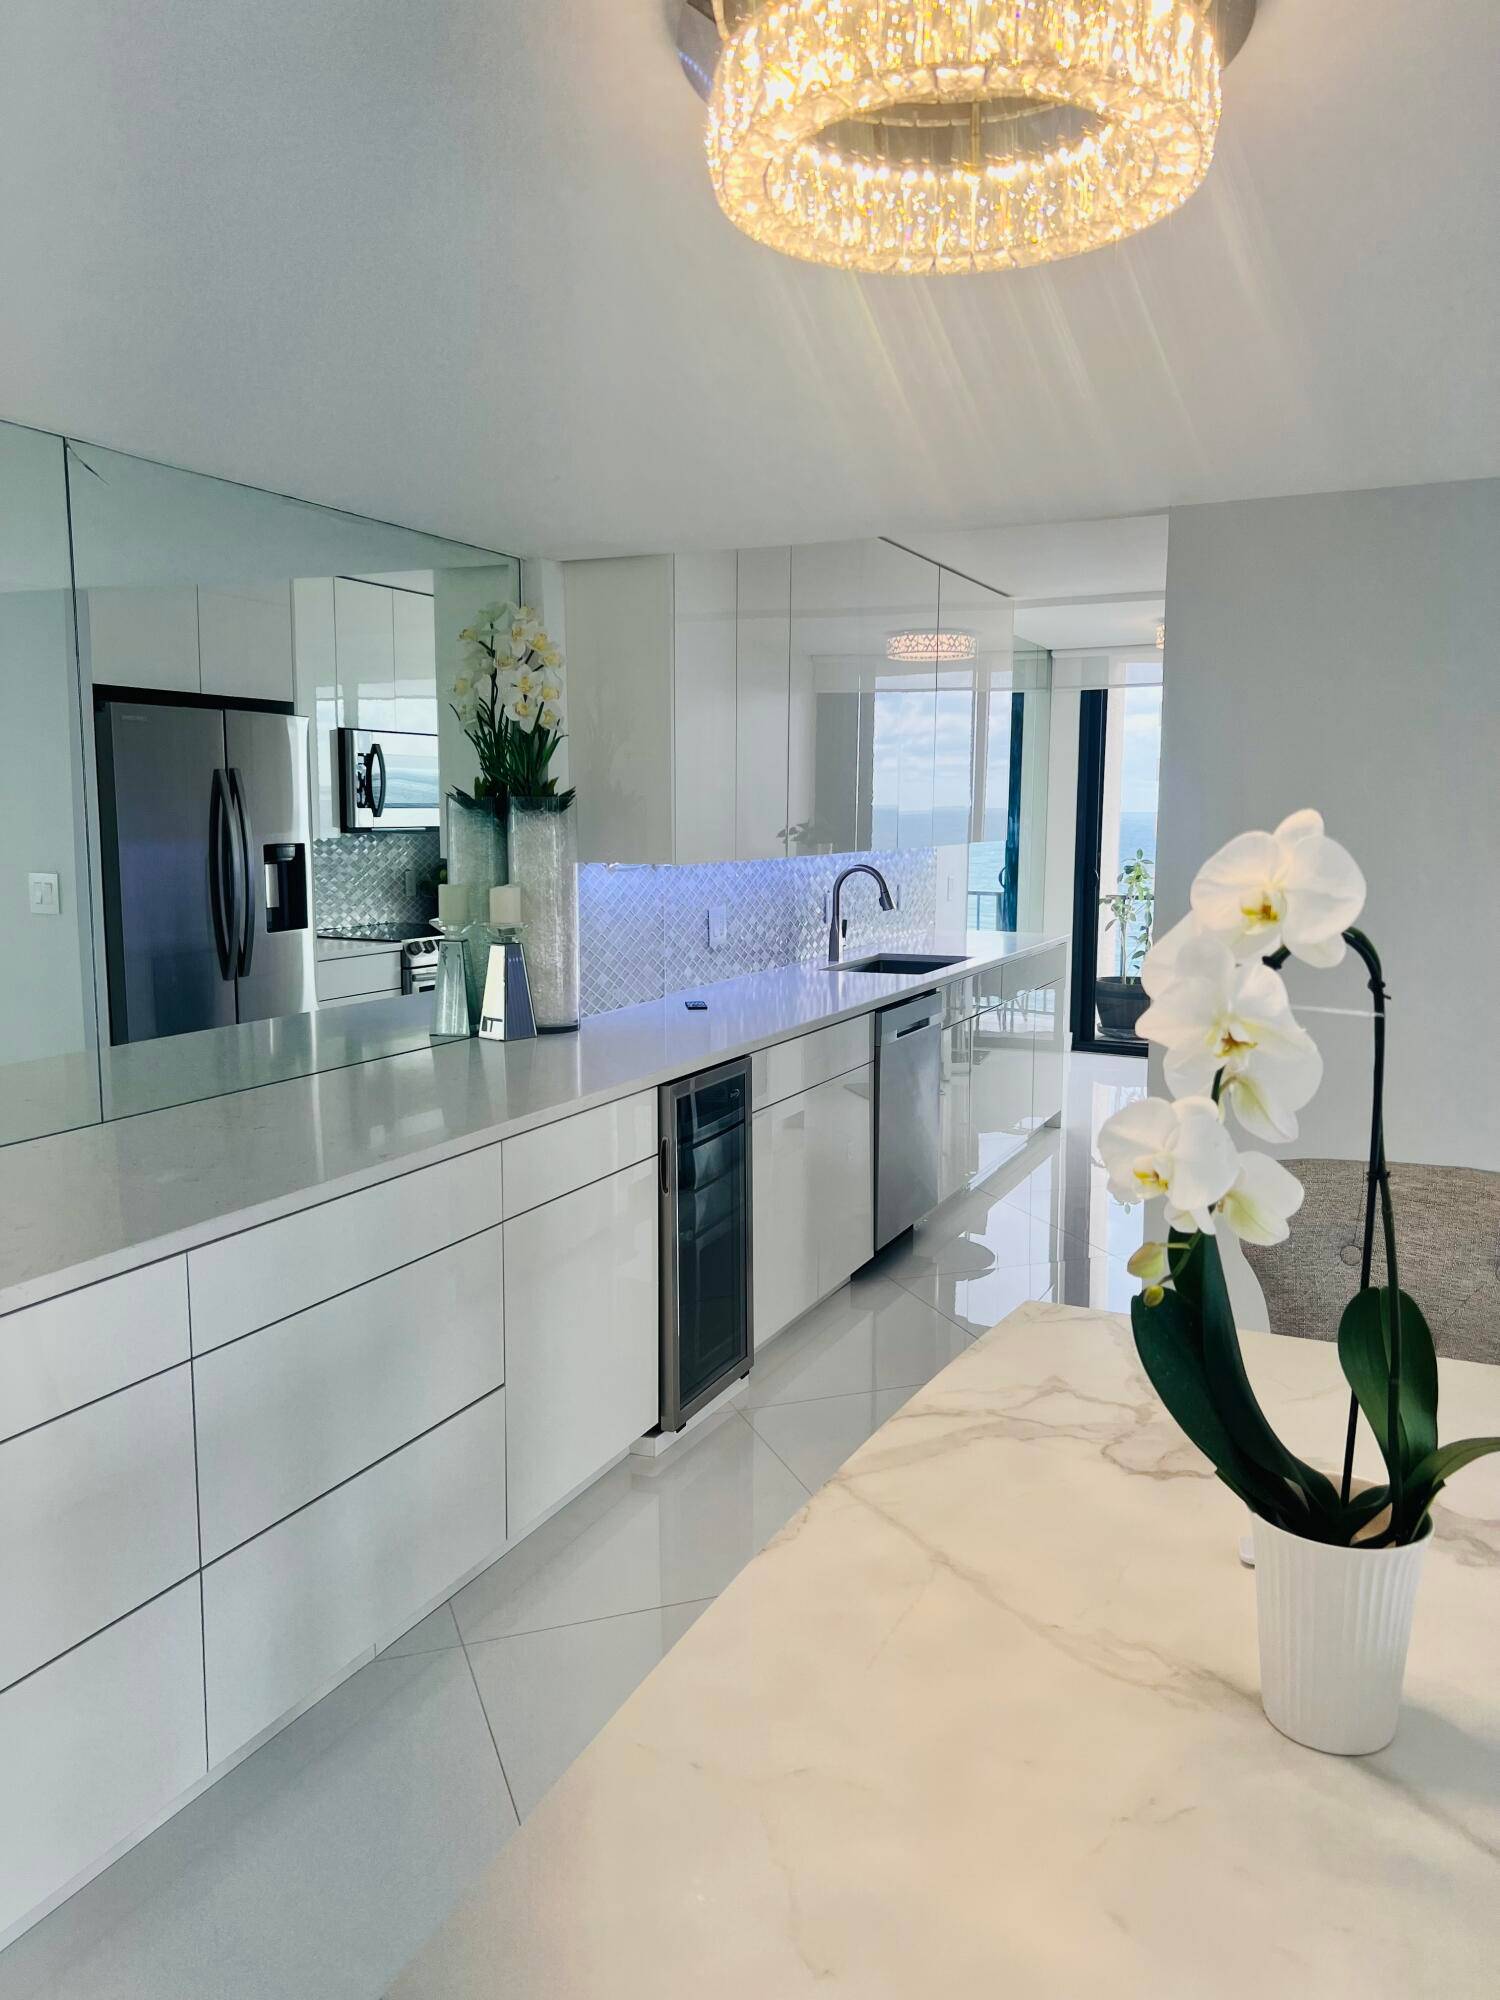 OCEANFRONT, breathtaking southeast, fully and beautifully remodeled corner unit with a double balcony captures spectacular views of the ocean and the intercostal from every room.